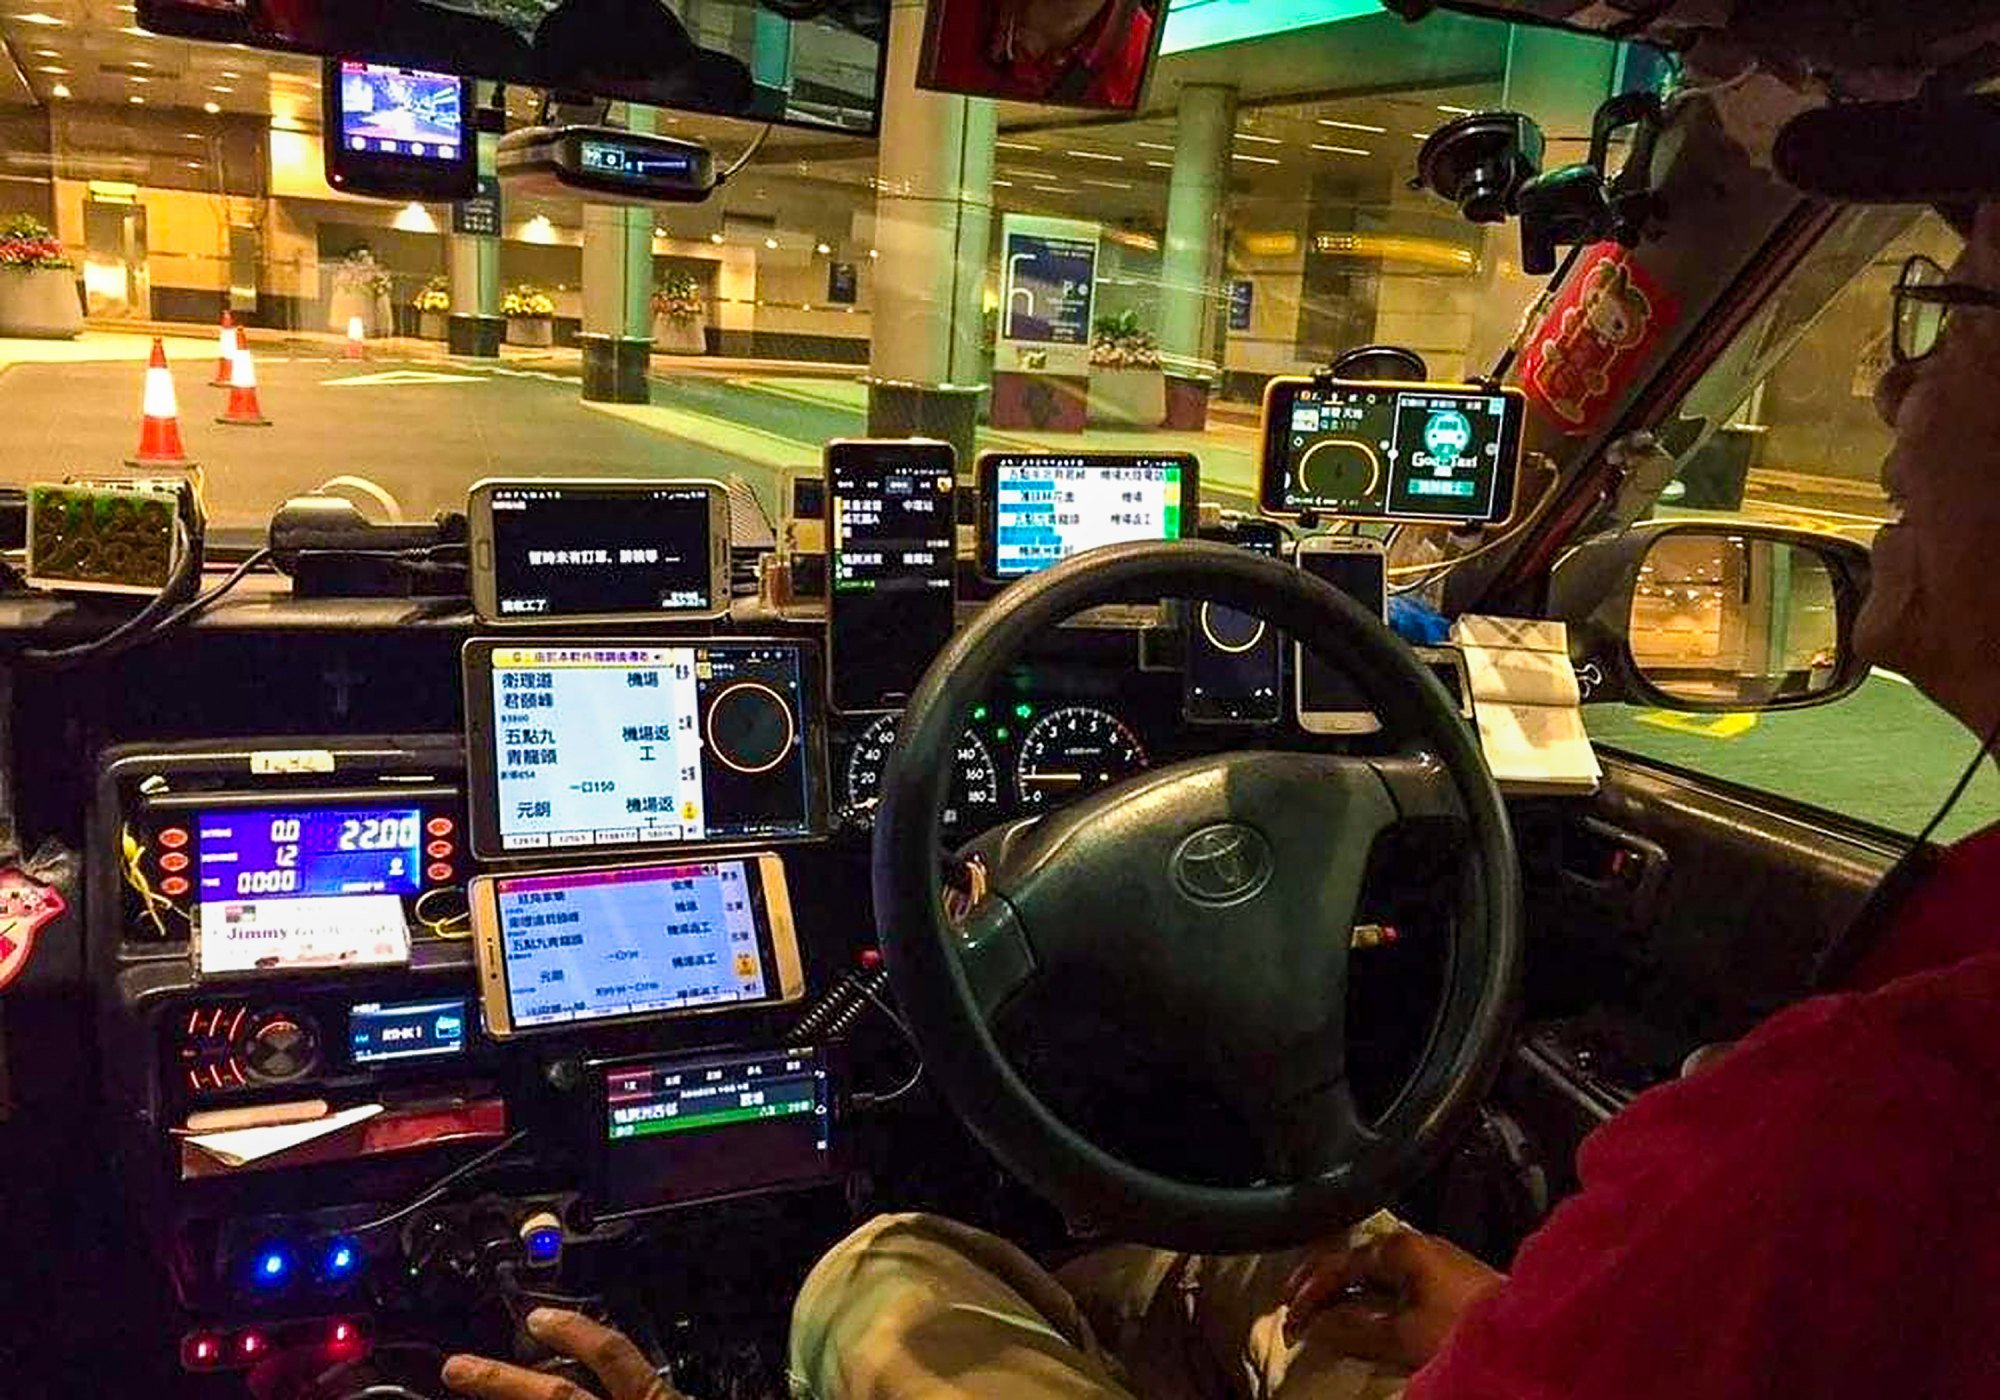 A taxi driver operating multiple devices on his dashboard. Cabbies have come under fire for poor service and overcharging passengers. Photo: Facebook/Man Kwong Battery